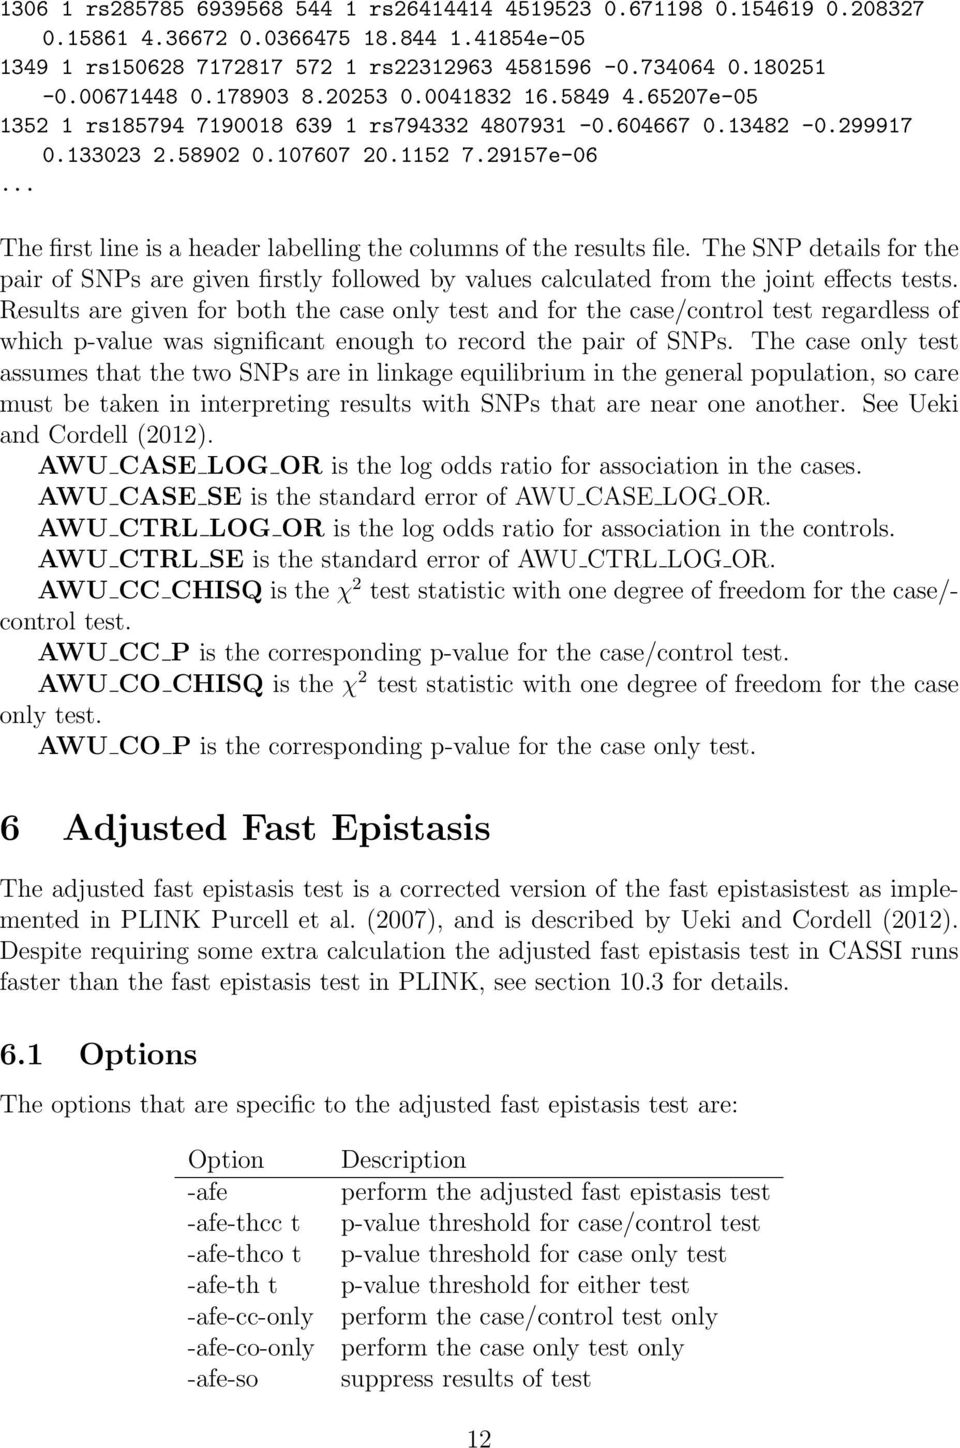 .. The first line is a header labelling the columns of the results file. The SNP details for the pair of SNPs are given firstly followed by values calculated from the joint effects tests.